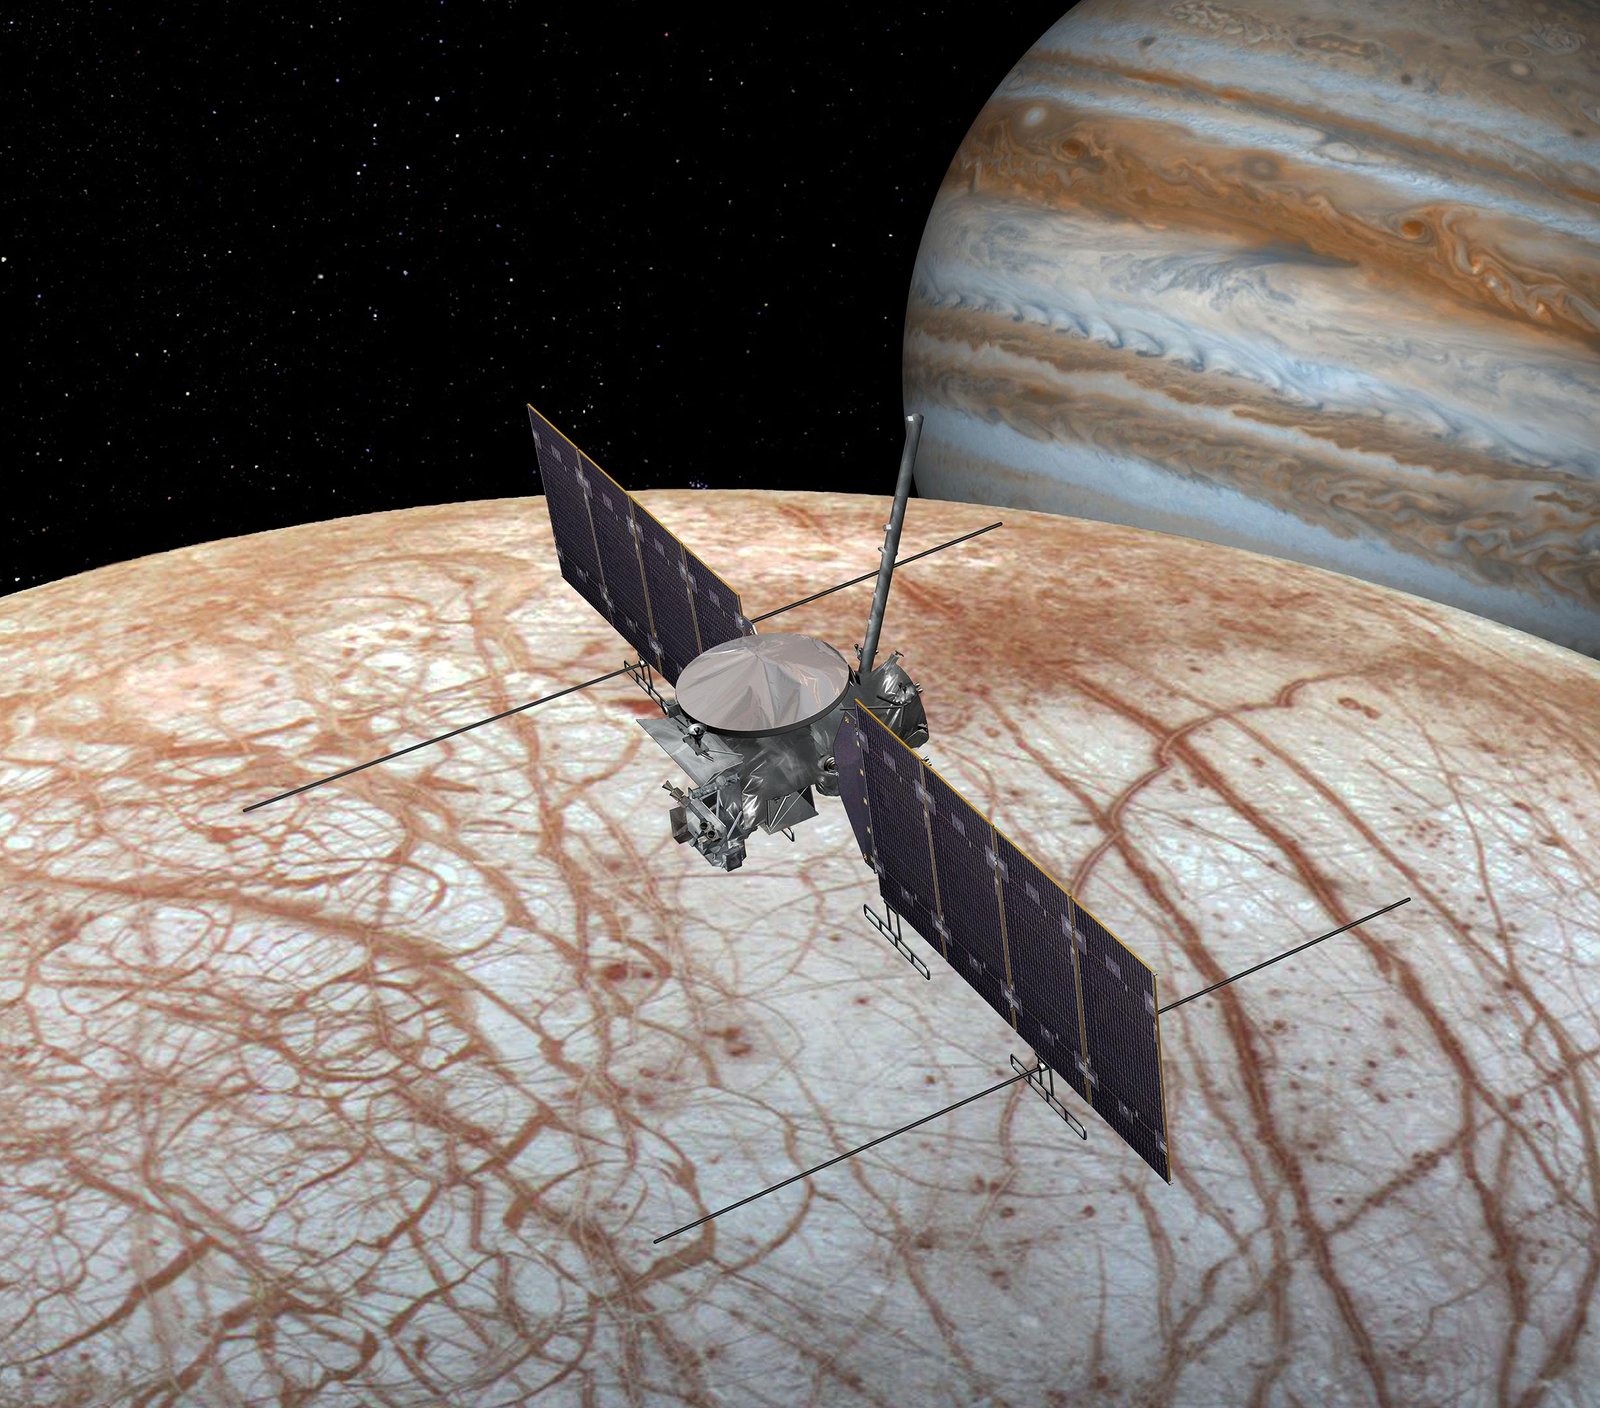 NASA’s Bold Quest To Discover Life on Jupiter’s Icy Moon Europa